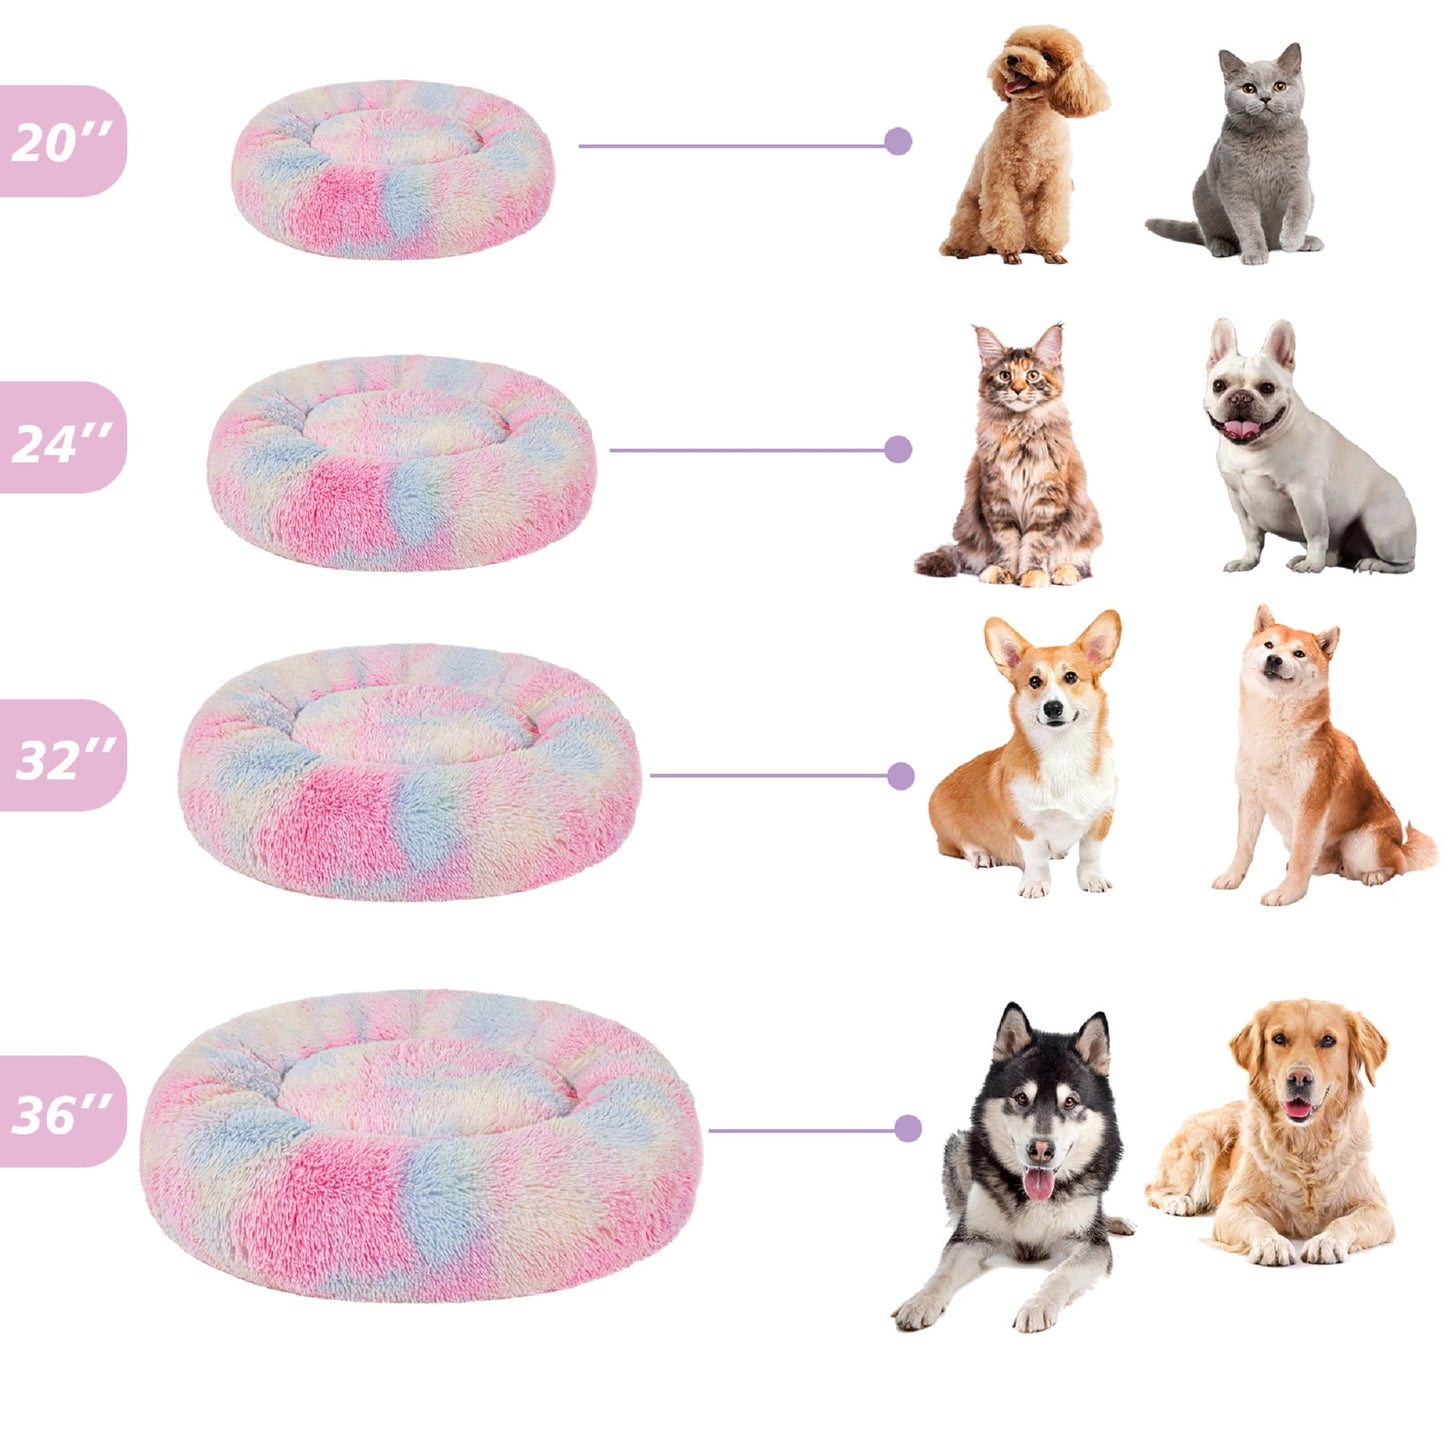 Calming Donut Dog Bed for Small Medium and Large dogs Anti-Anxiety Plush Soft and Cozy Cat Bed 36 inches Warming Pet Bed for Winter and Fall(Dradient Grey)